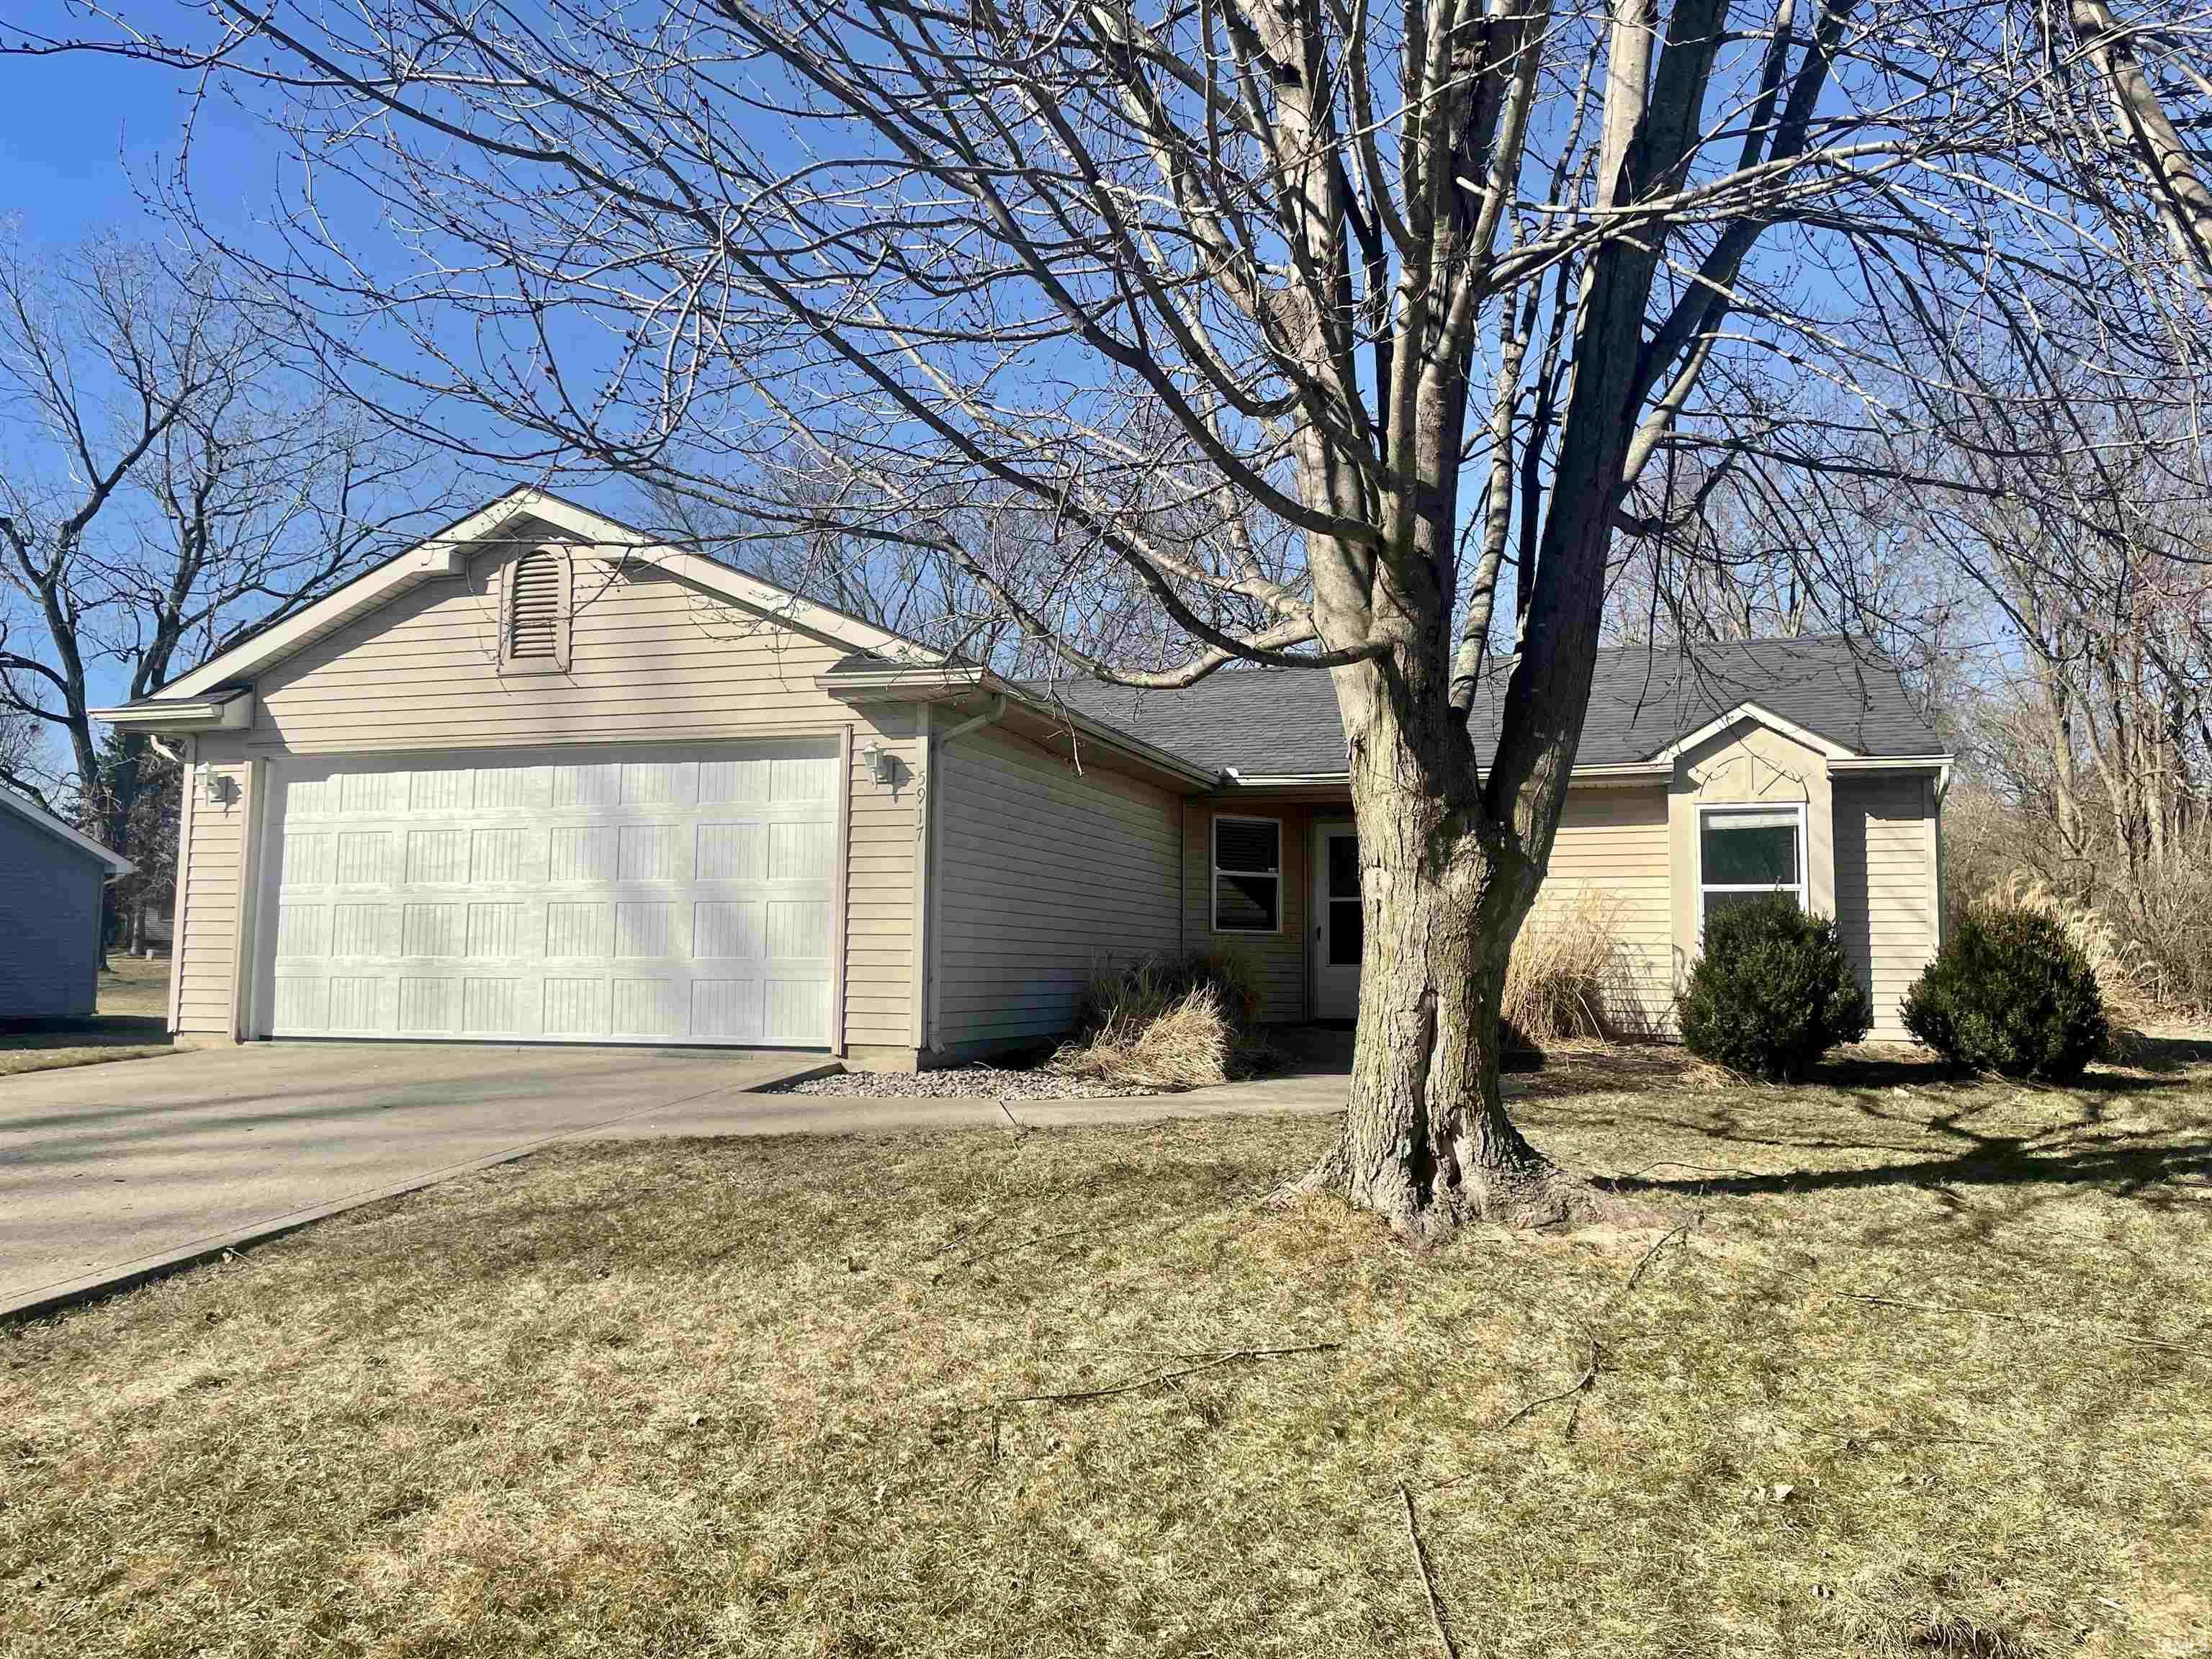 5917 Arapaho, Fort Wayne, Indiana 46825, 3 Bedrooms Bedrooms, 7 Rooms Rooms,2 BathroomsBathrooms,Residential,For Sale,Arapaho,202306203